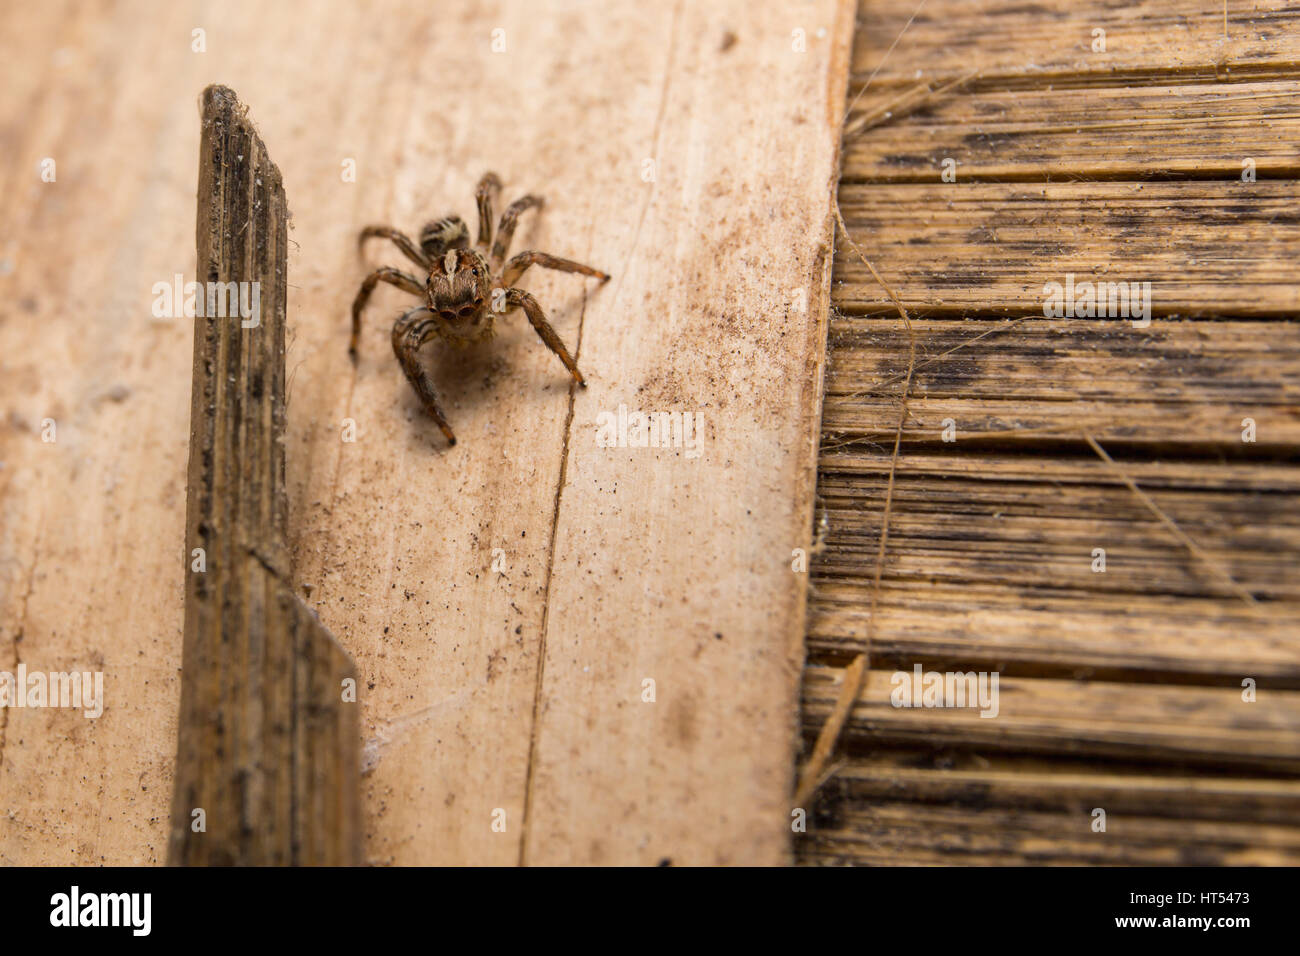 Jumping Spider(Salticidae), Spider in Thailand on wood bamboo. Stock Photo